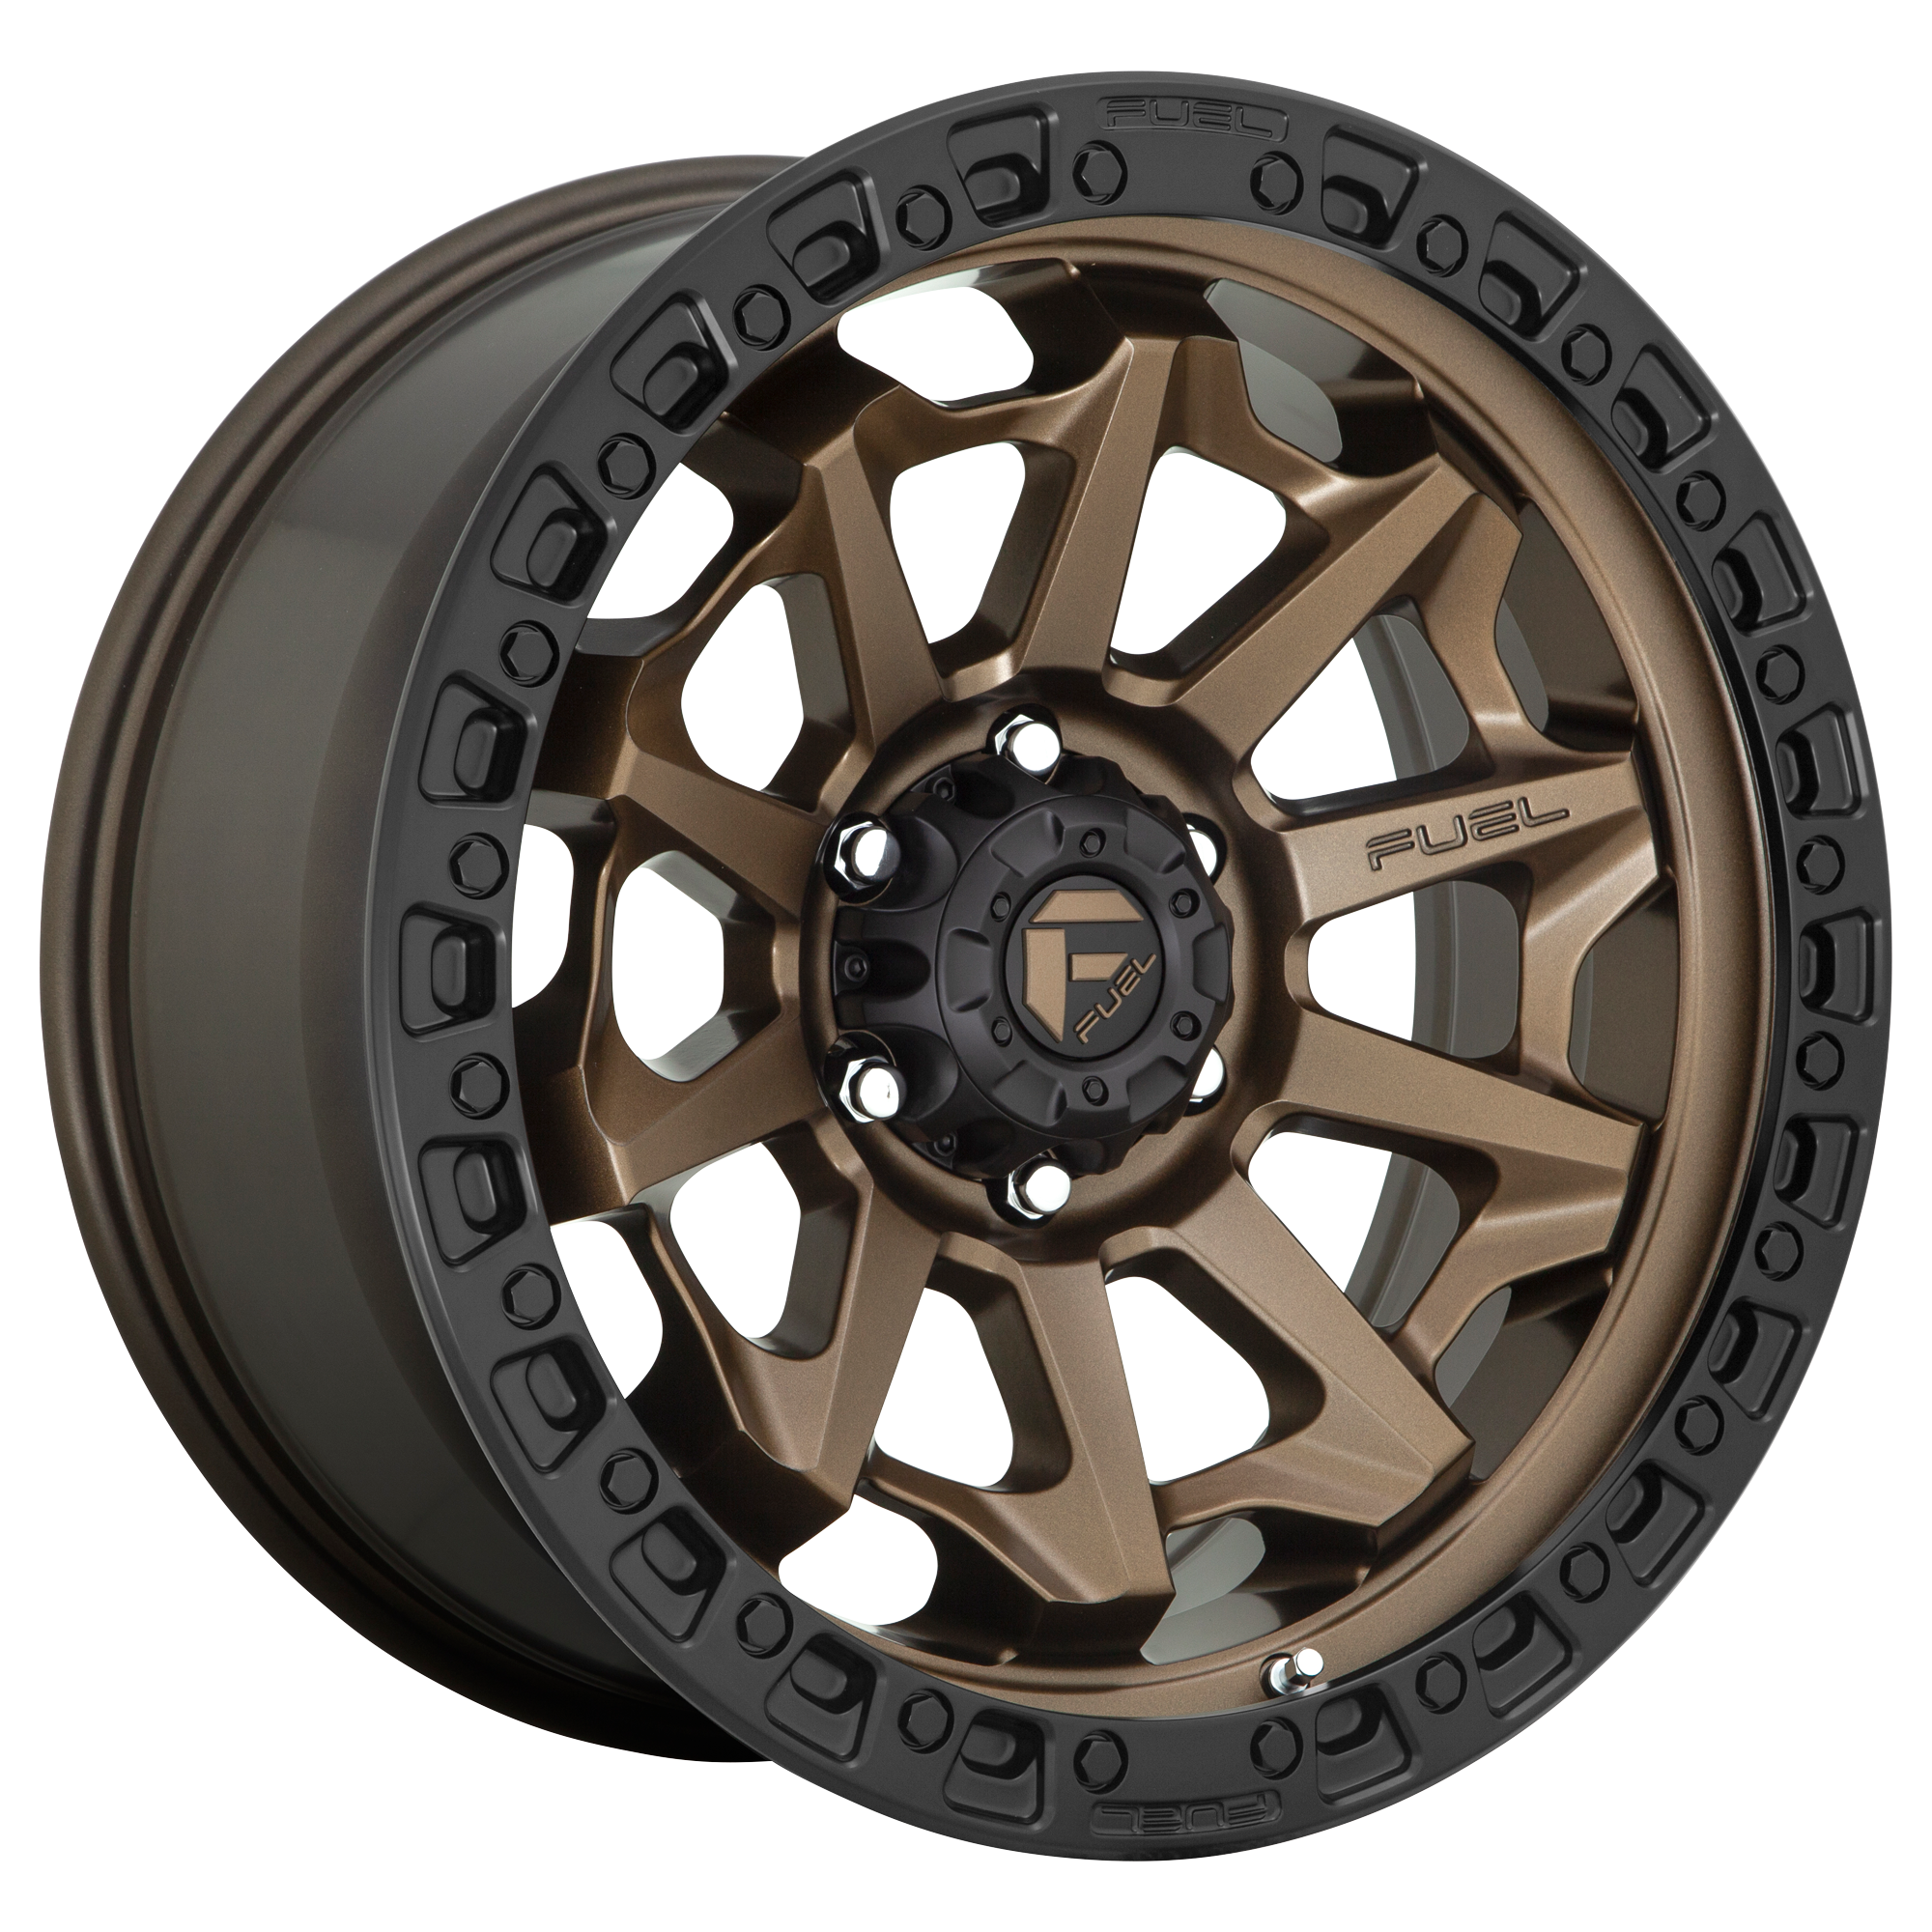 COVERT 17x9 6x139.70 MATTE BRONZE BLACK BEAD RING (-12 mm) - Tires and Engine Performance